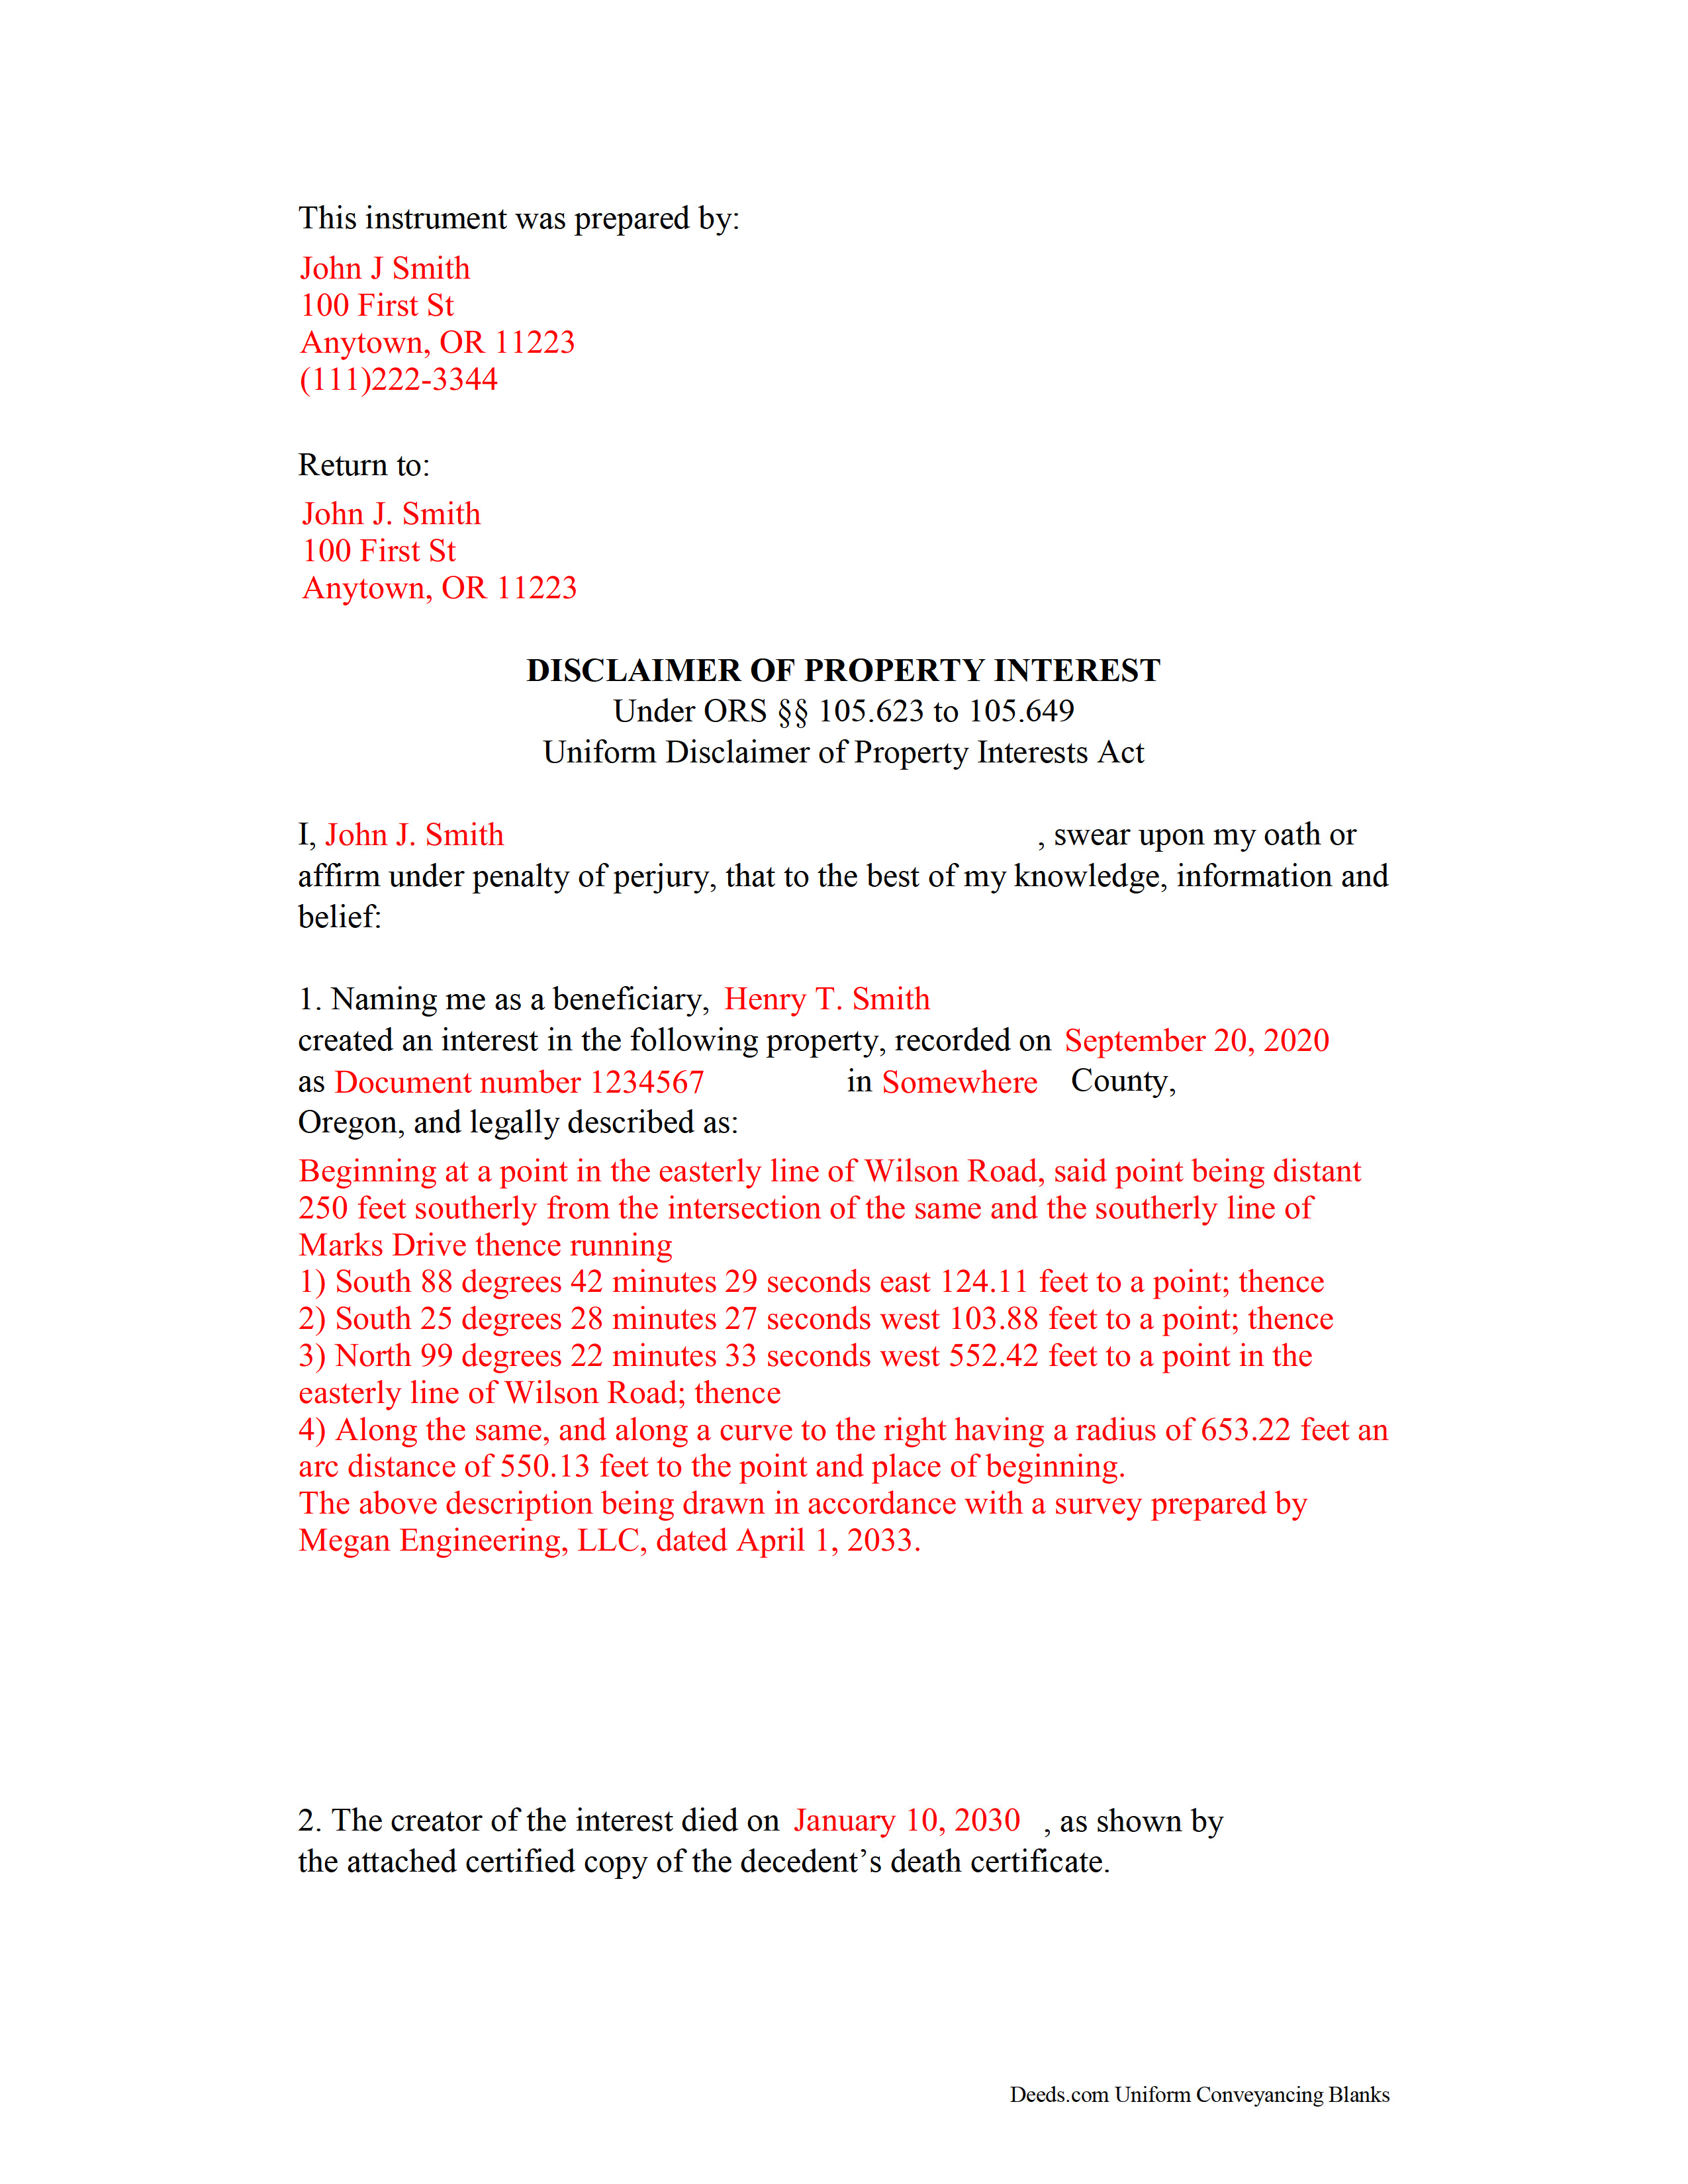 Completed Example of the Disclaimer of Property Interest Document